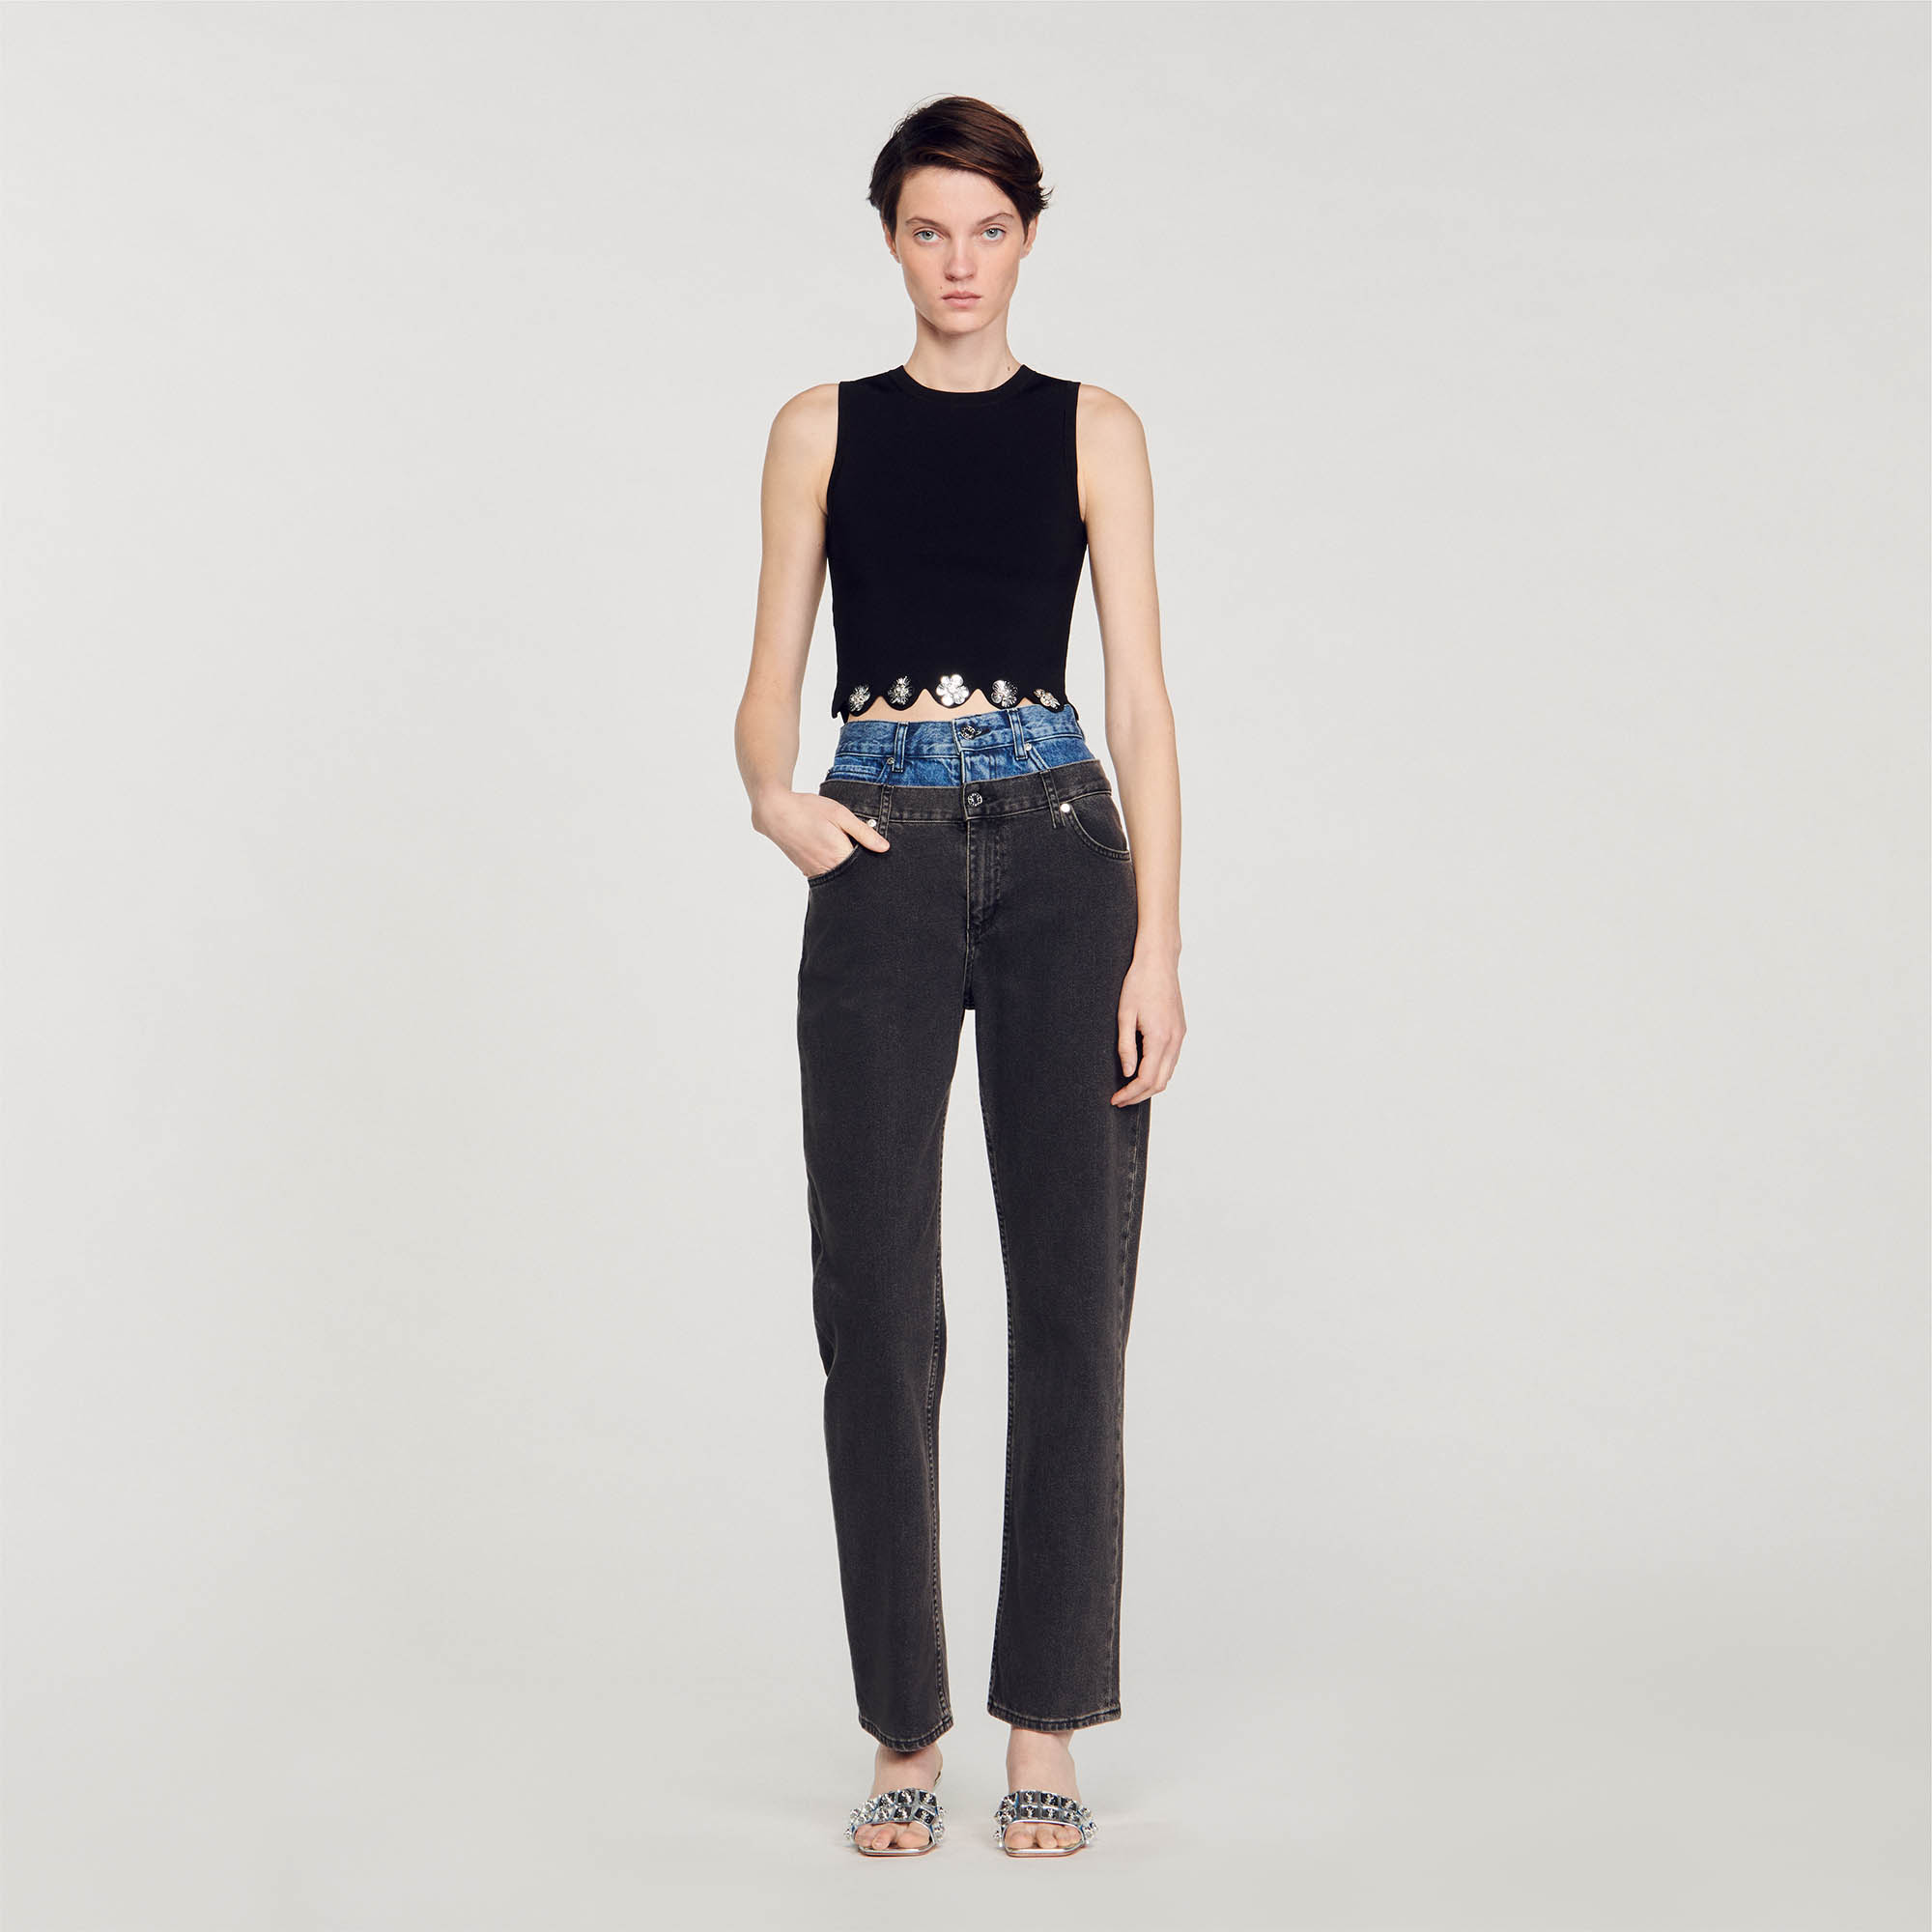 Sandro viscose Sleeveless knit crop top with round neck and scalloped hem embellished with floral sequins